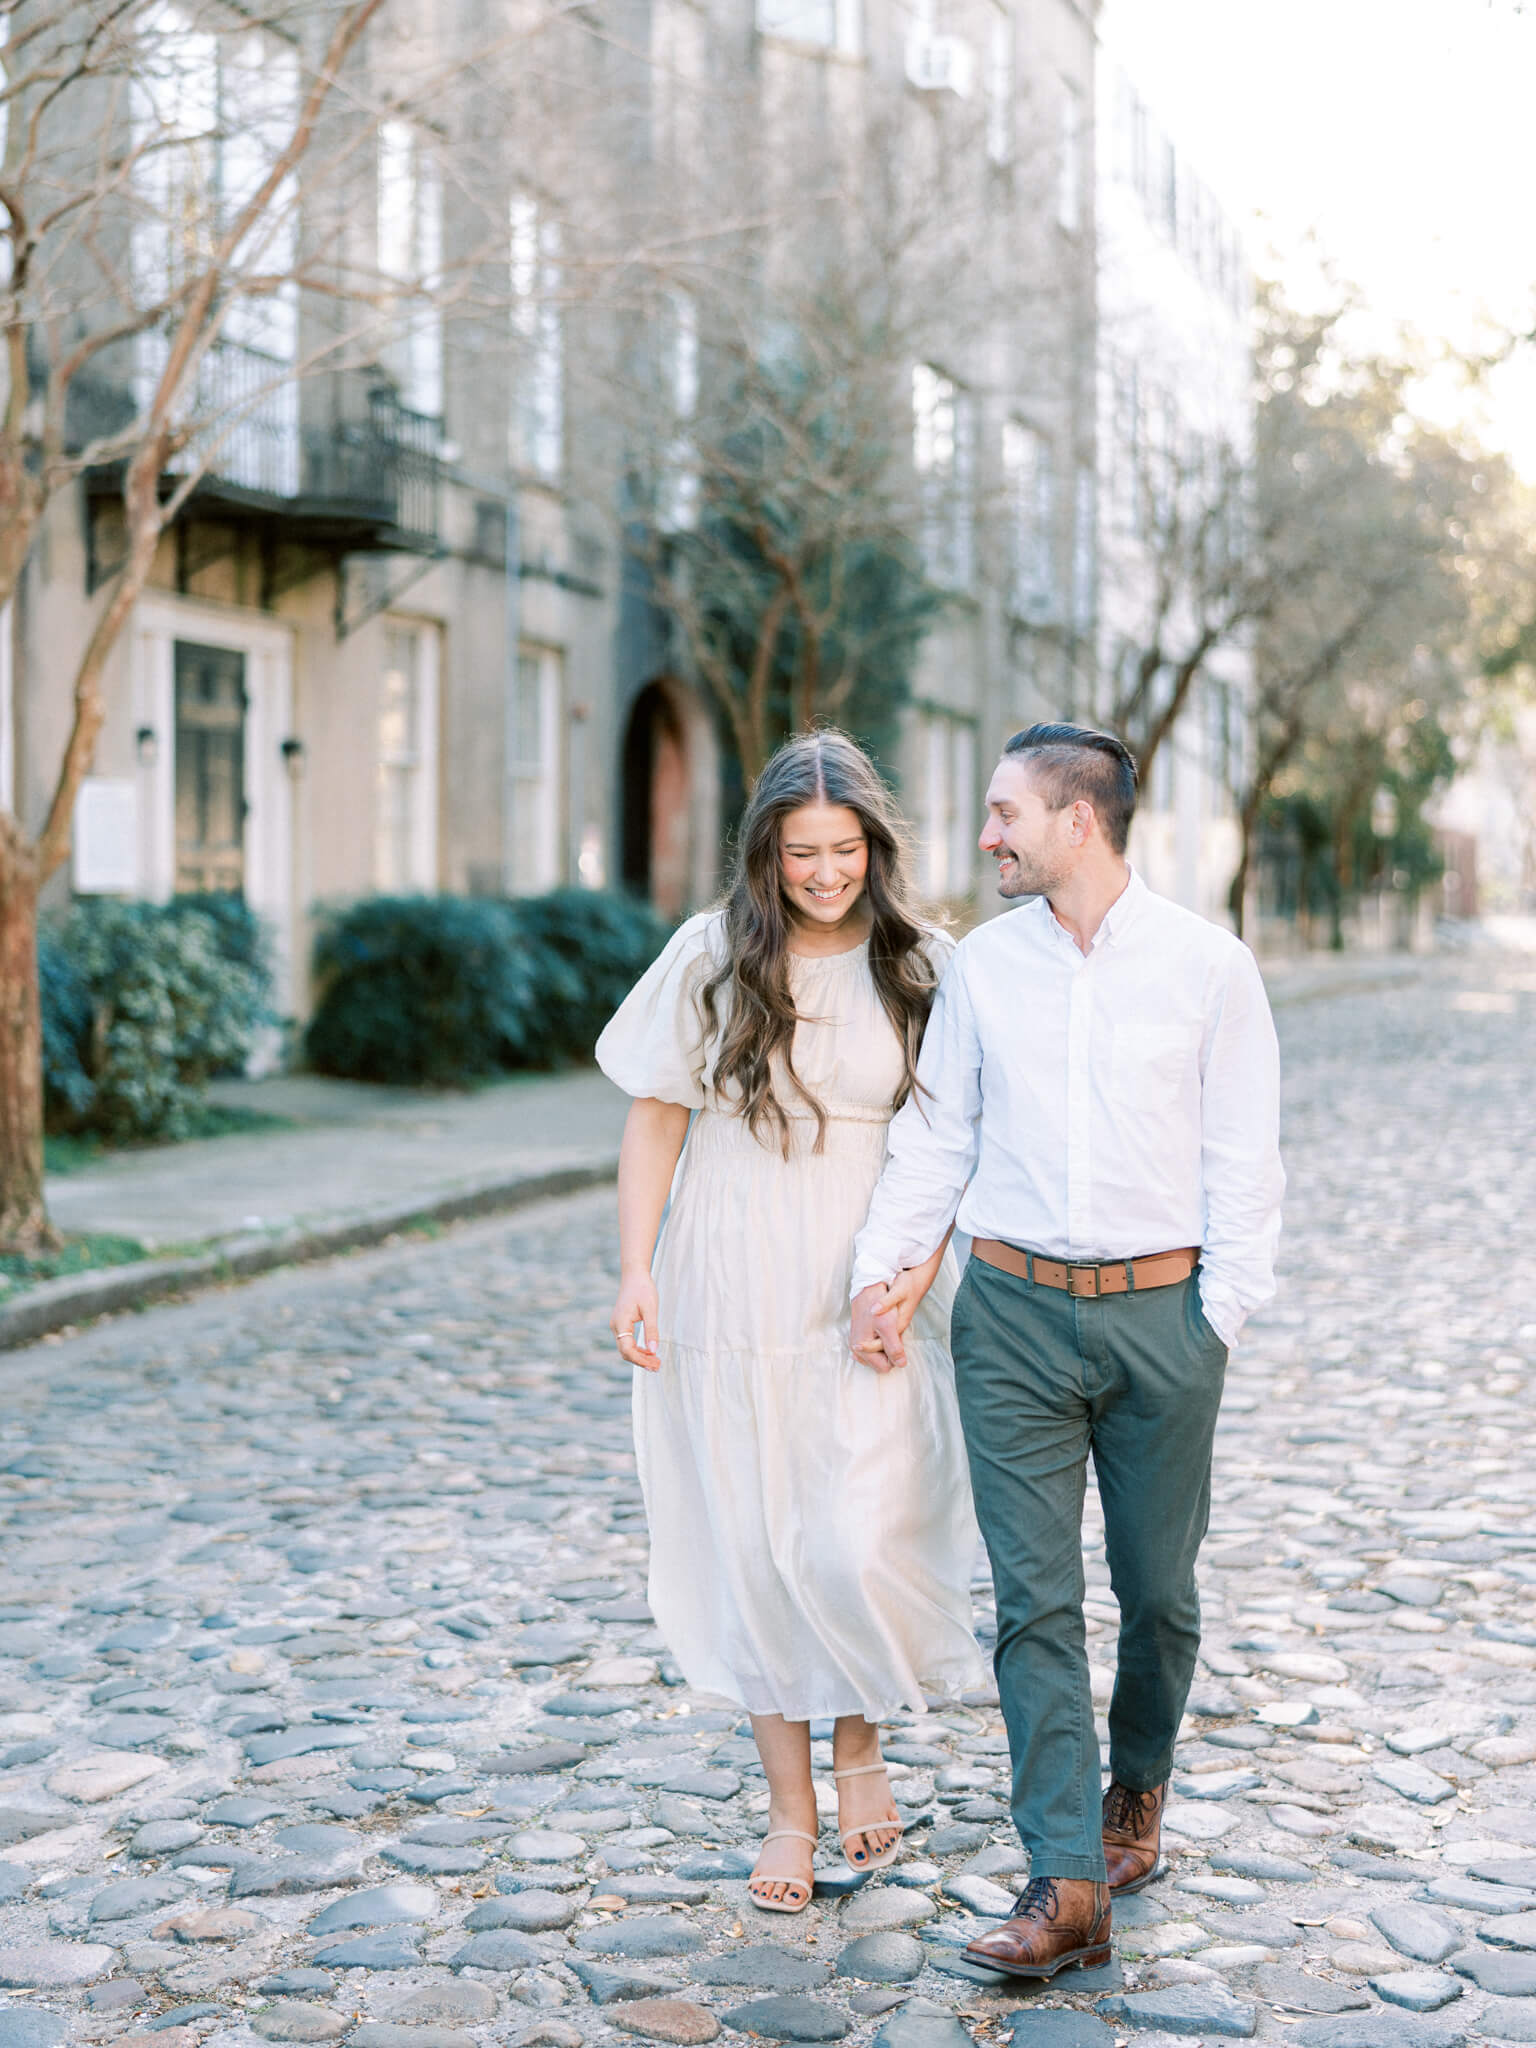 A man in green pants and a white shirt walking hand in hand with a woman in a cream dress on Chalmer's Street in Charleston.